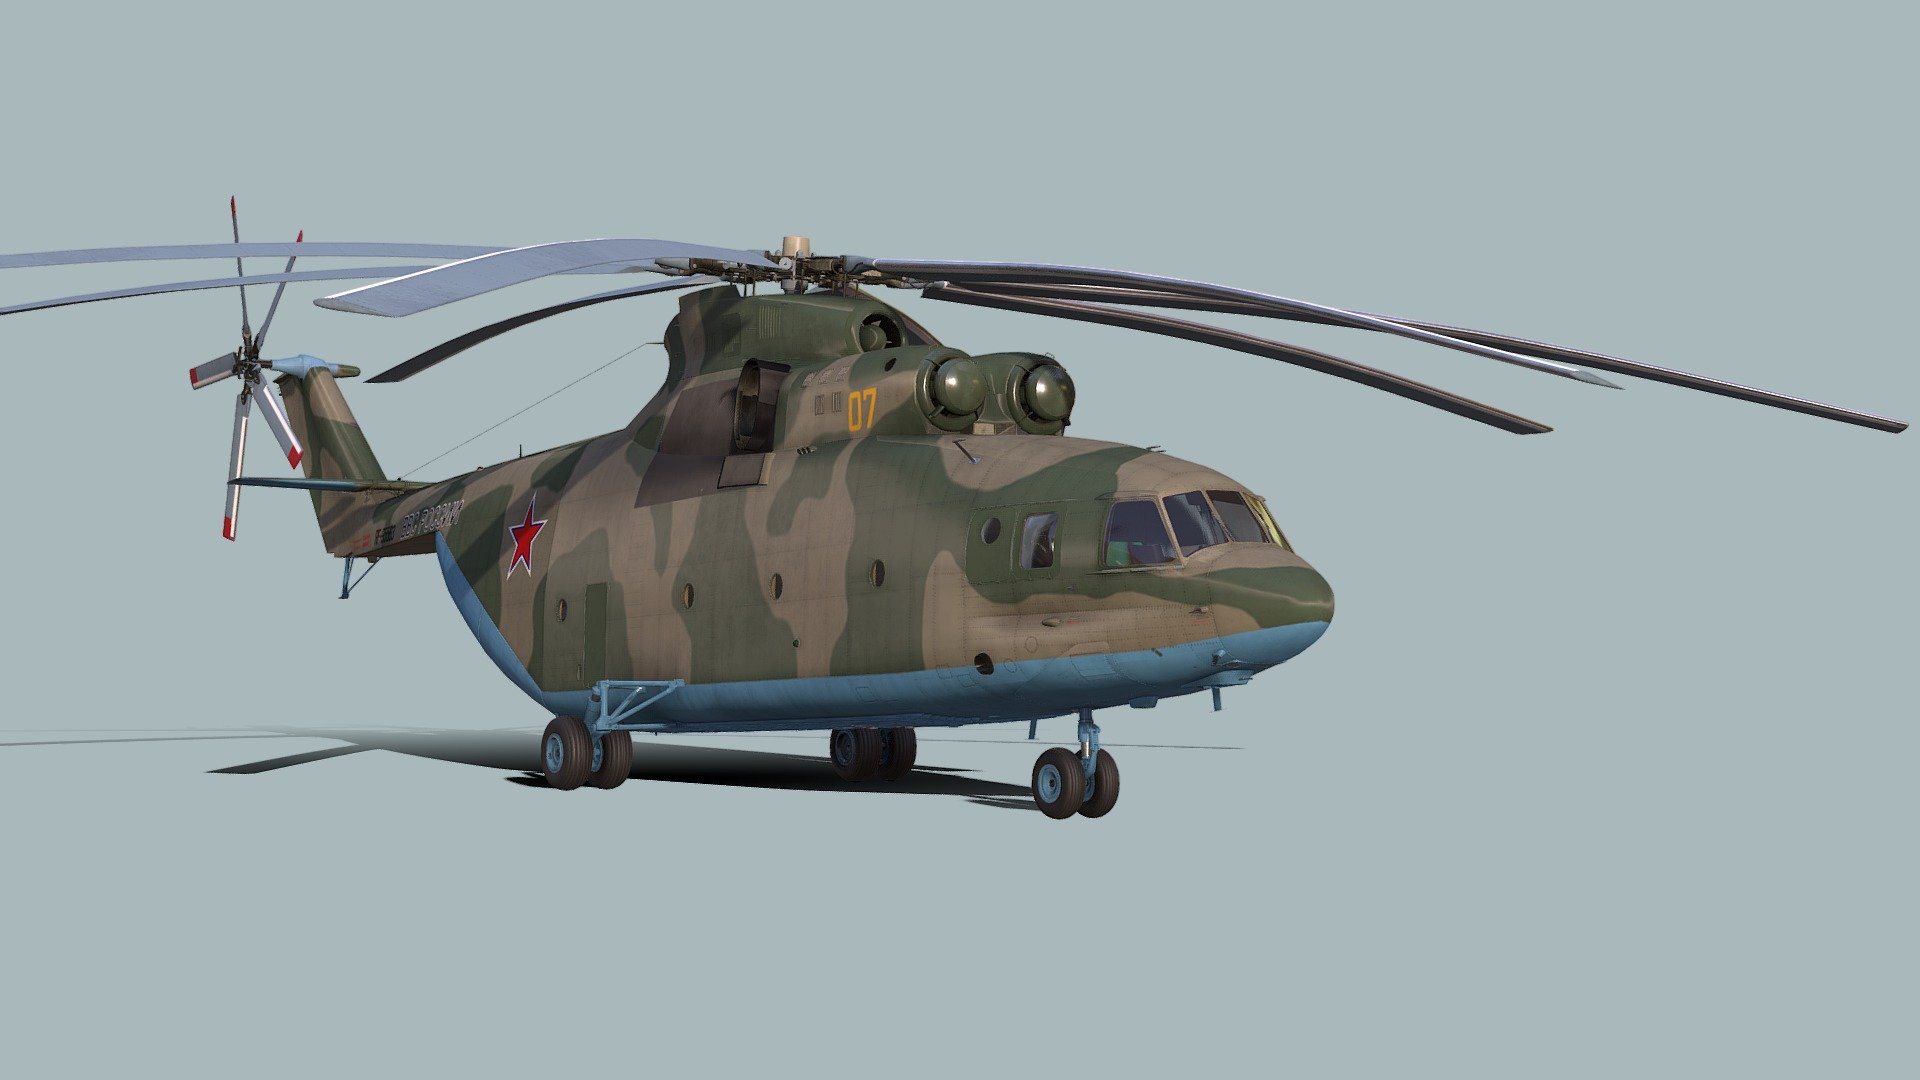 The Mil Mi-26 (Russian: Миль Ми-26, NATO reporting name: Halo) is a Soviet/Russian heavy transport helicopter. Its product code is Izdeliye 90. Operated by both military and civilian operators, it is the largest and most powerful helicopter to have gone into serial production 3d model